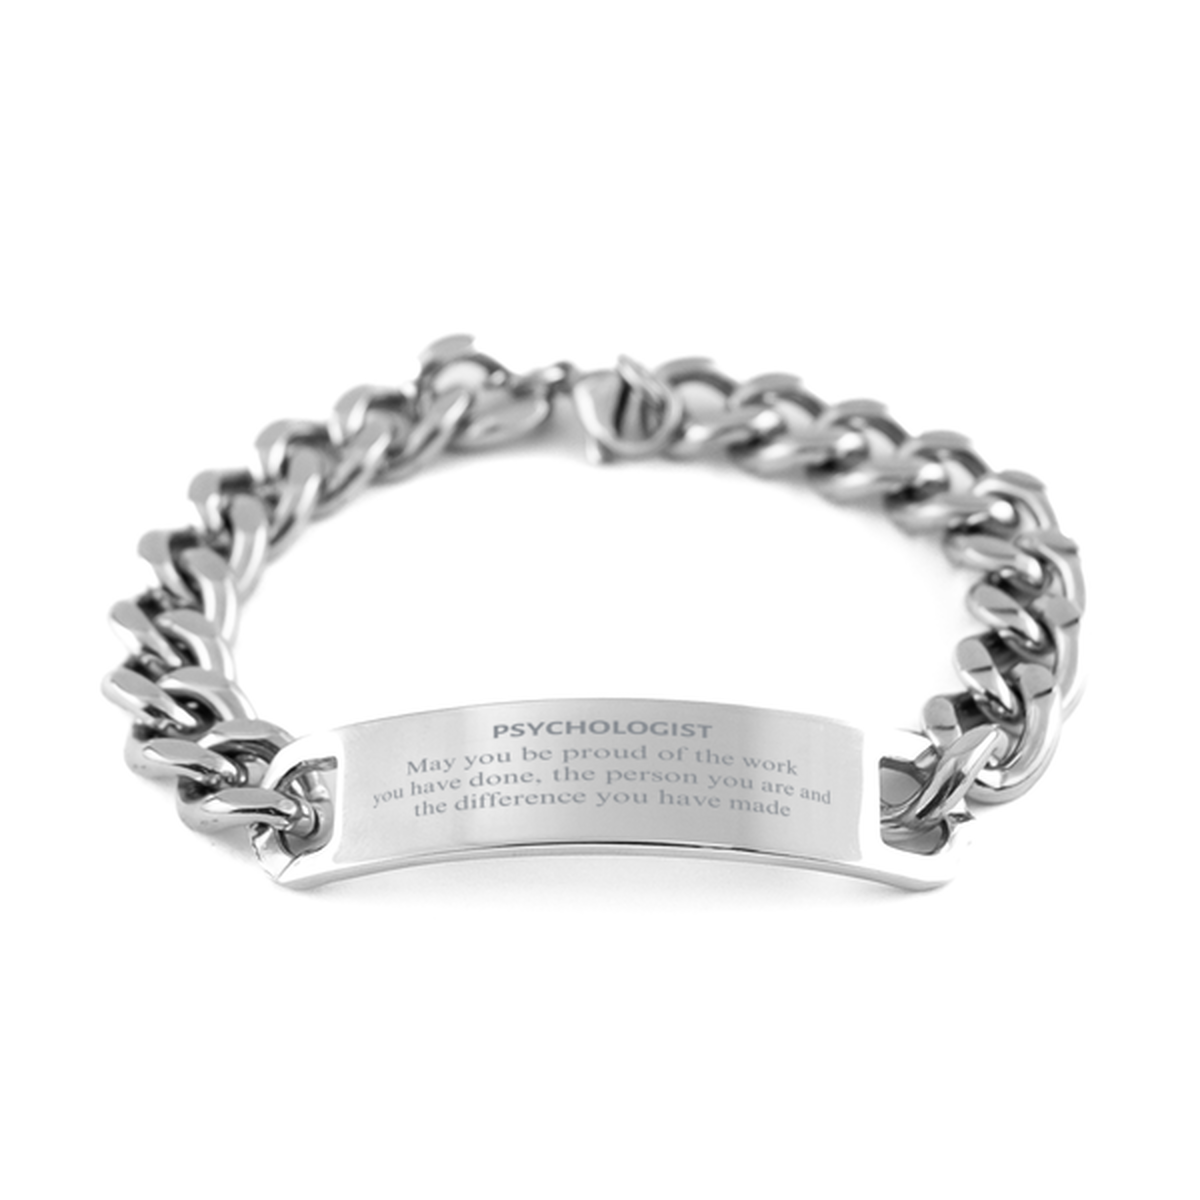 Psychologist May you be proud of the work you have done, Retirement Psychologist Cuban Chain Stainless Steel Bracelet for Colleague Appreciation Gifts Amazing for Psychologist